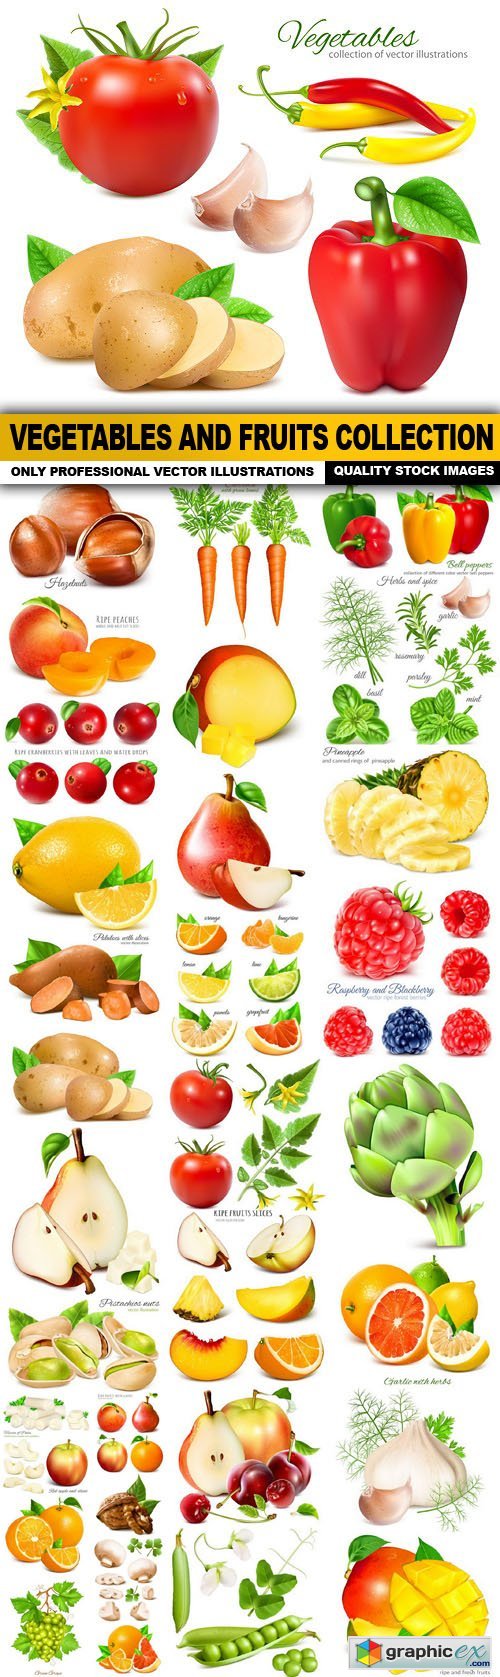 Vegetables And Fruits Collection